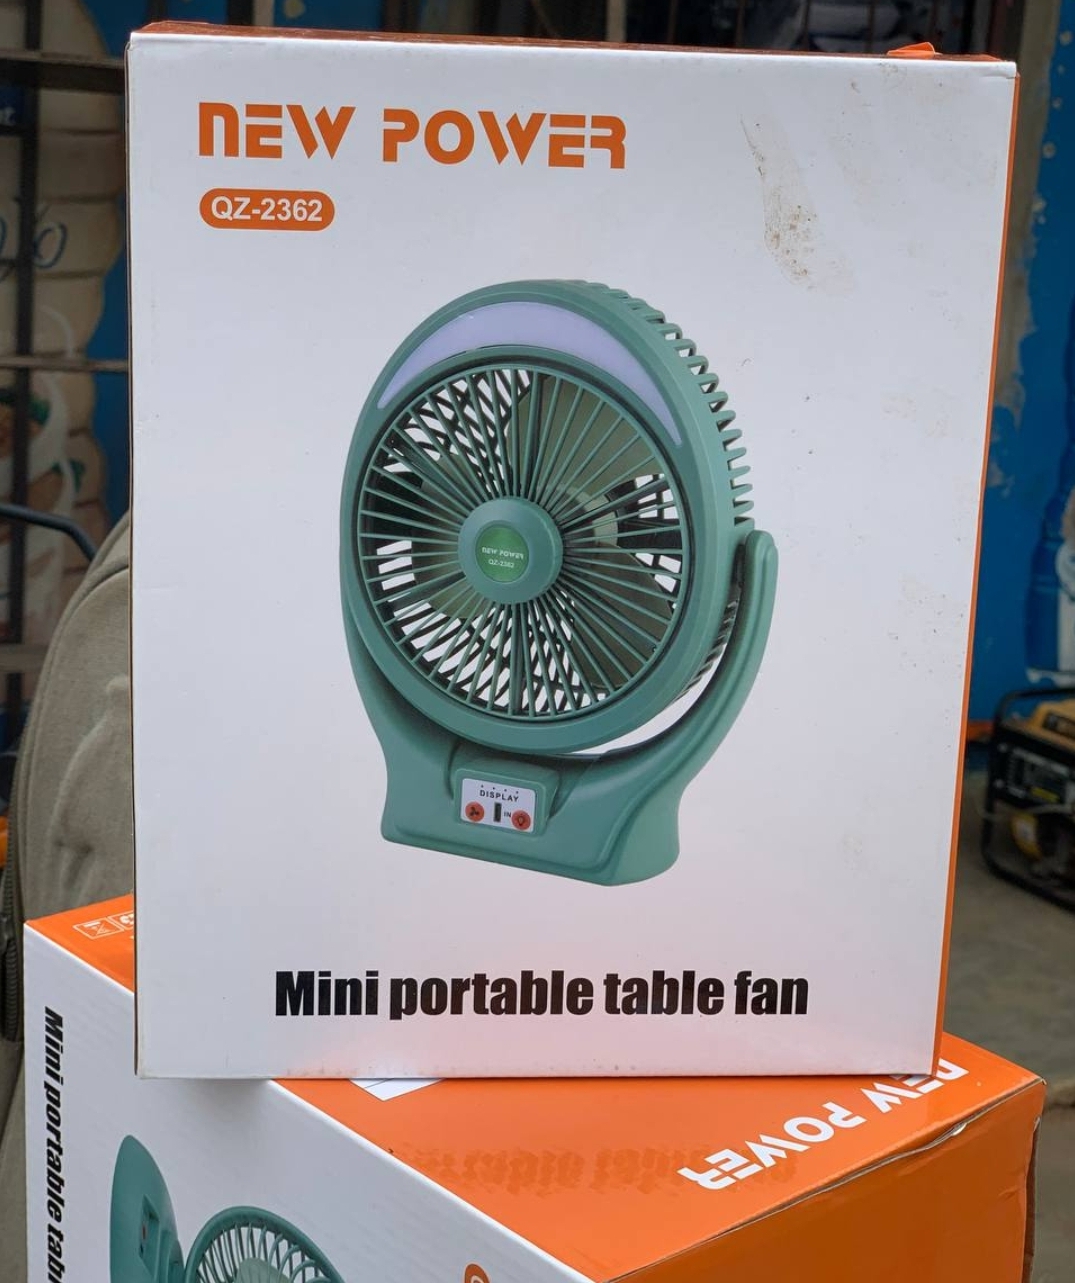 New Power 2362 Mini Portable Fan with Led Light